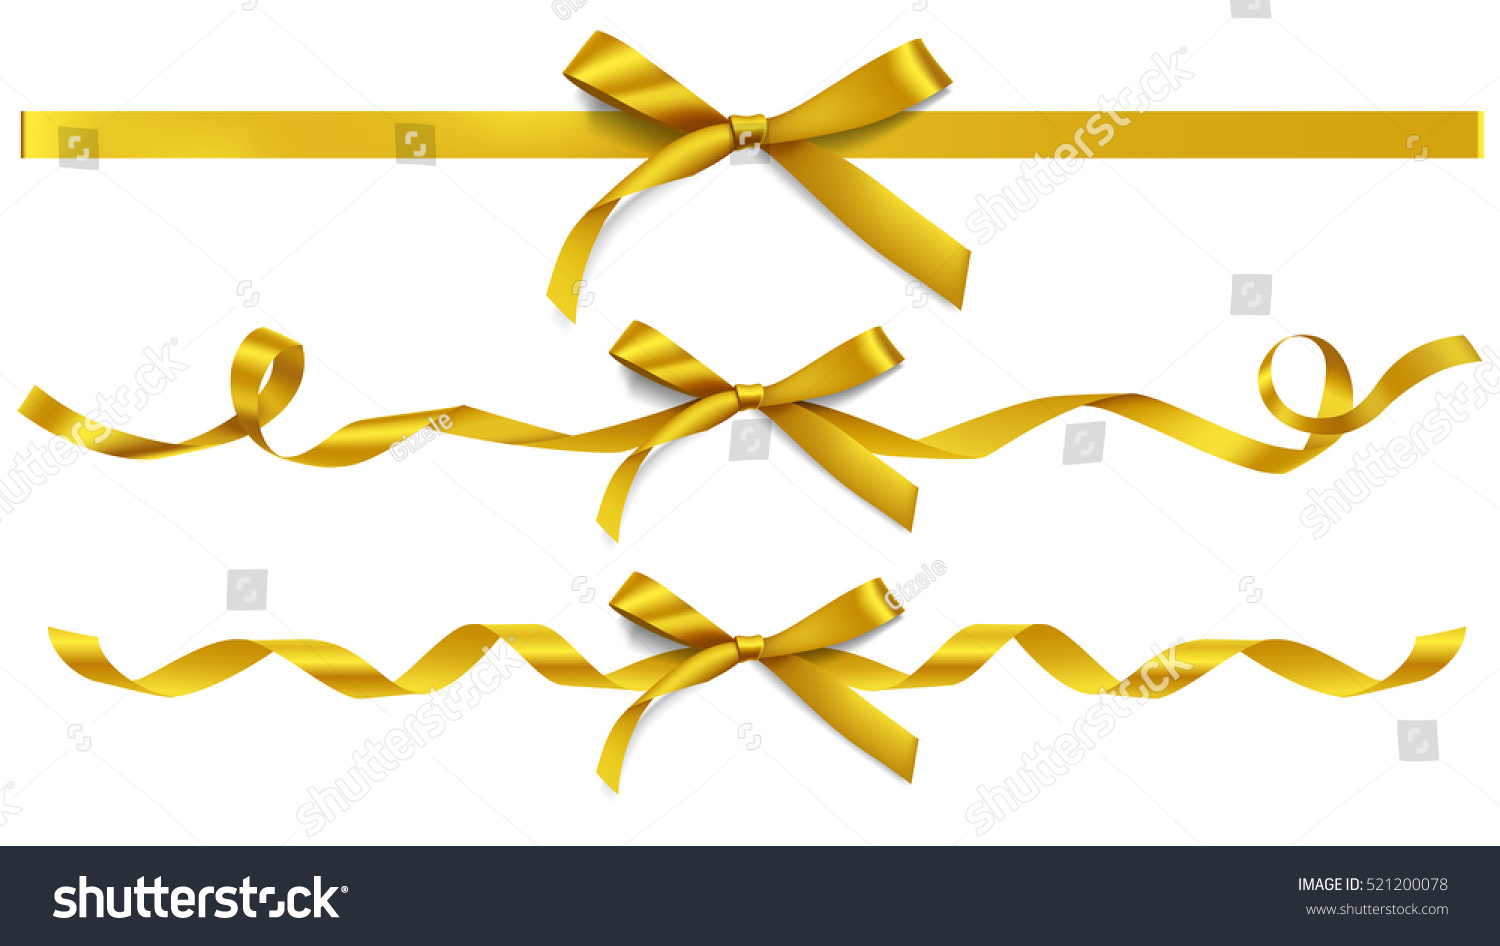 Set of decorative golden bows with horizontal gold ribbons isolated on white. Vector yellow gift bow with curled ribbon for page decor. New year holiday decorations #521200078